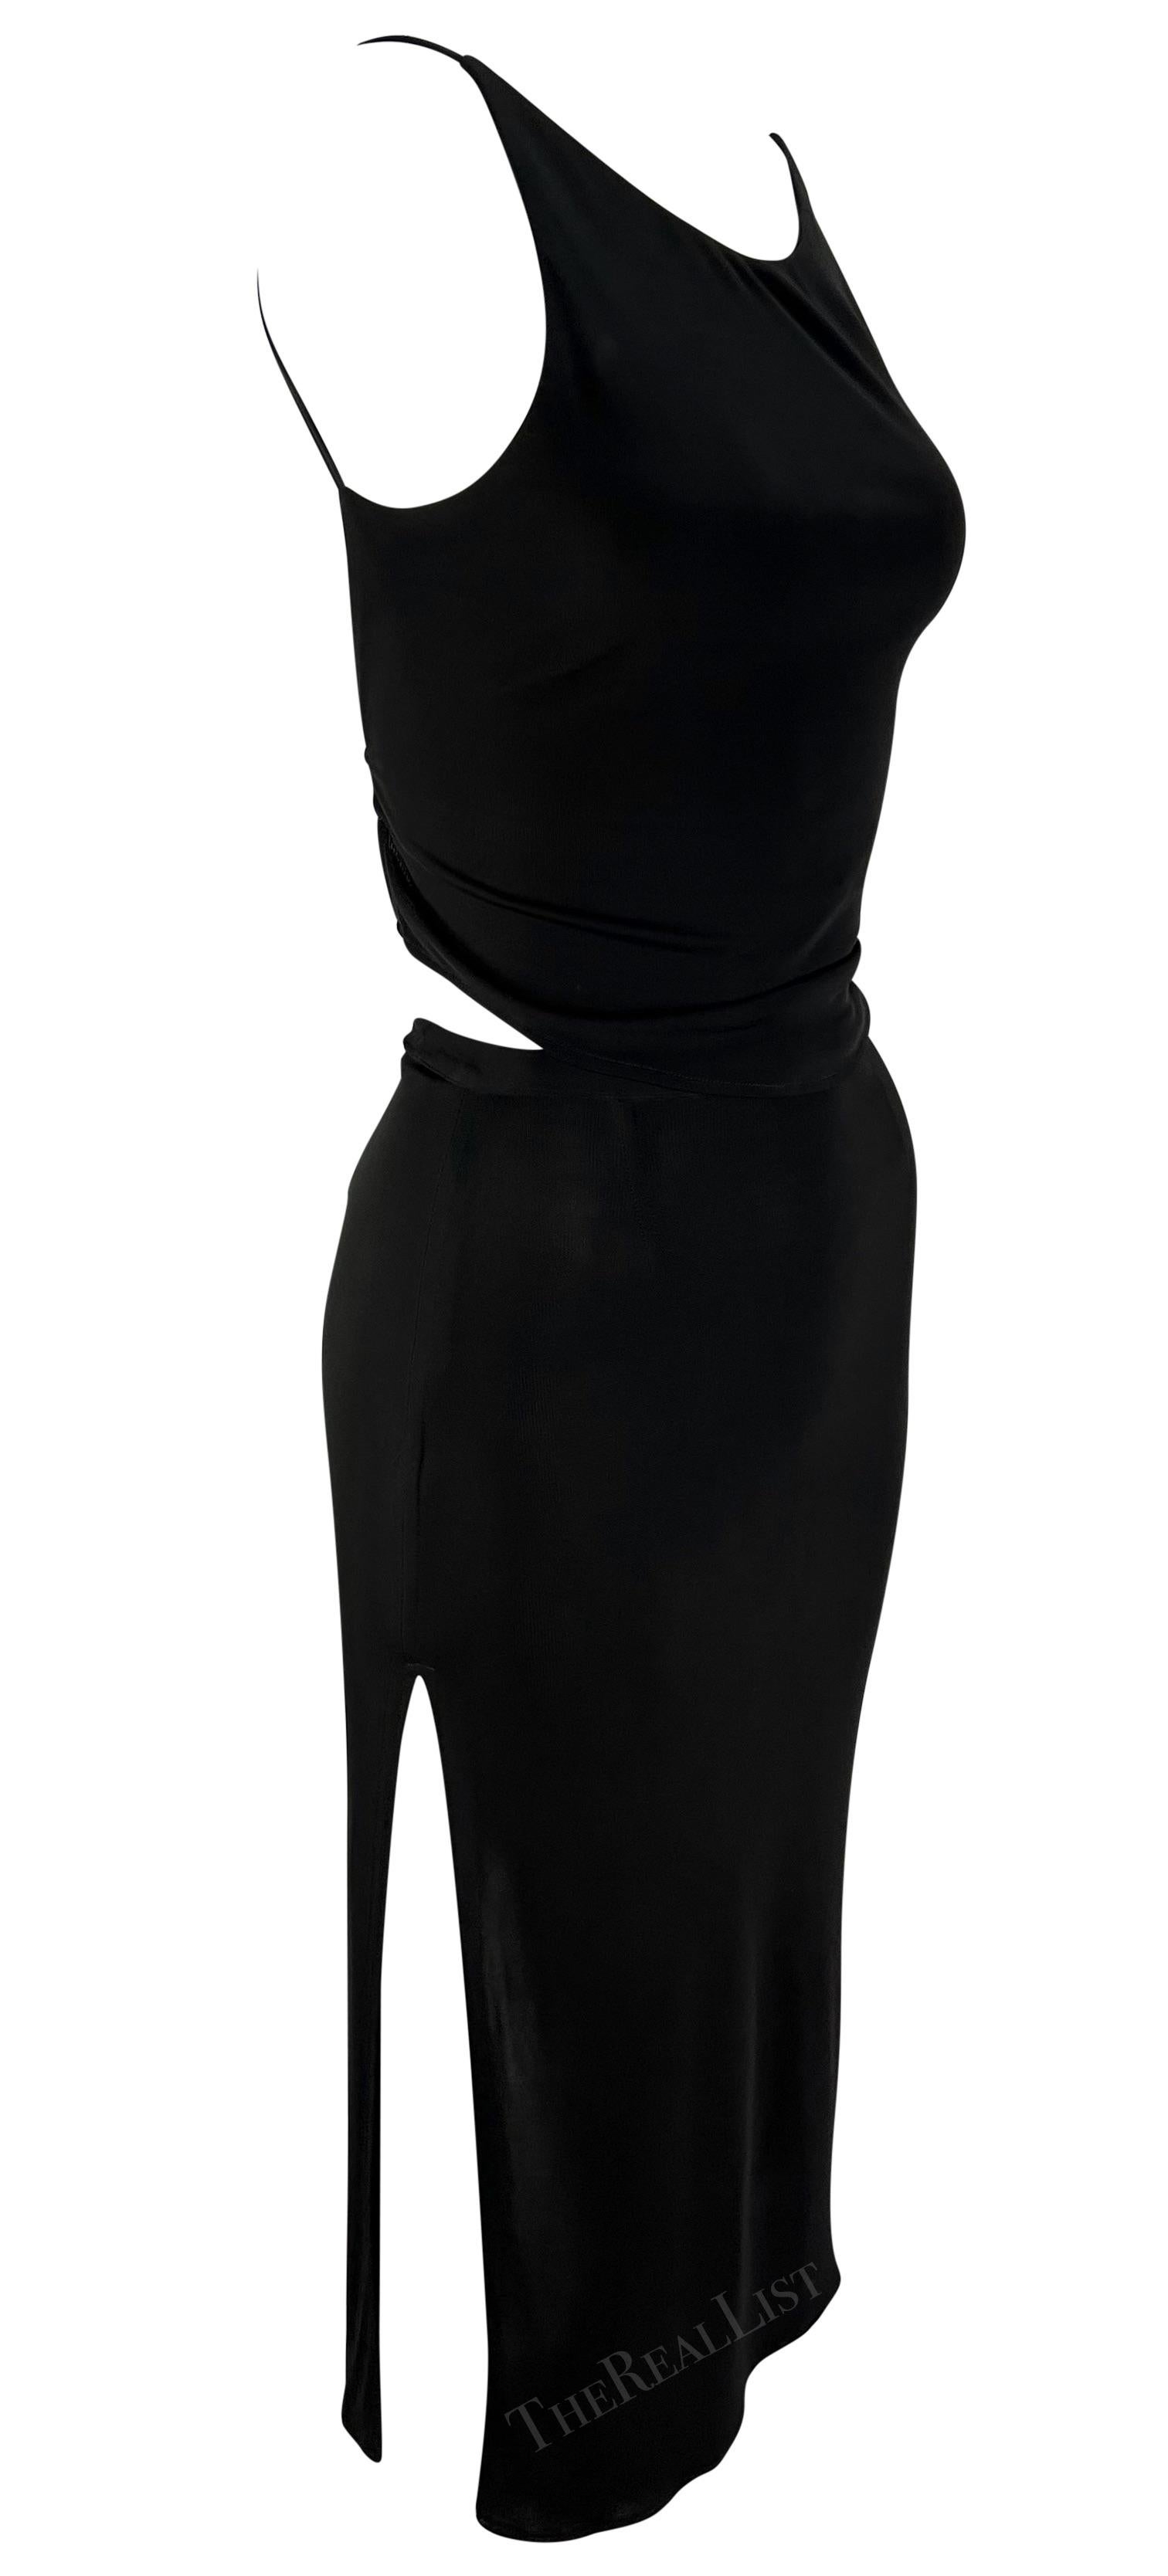 1990s Yigal Azrouël Black Bodycon Backless Crop Top High Slit Skirt Set In Excellent Condition For Sale In West Hollywood, CA